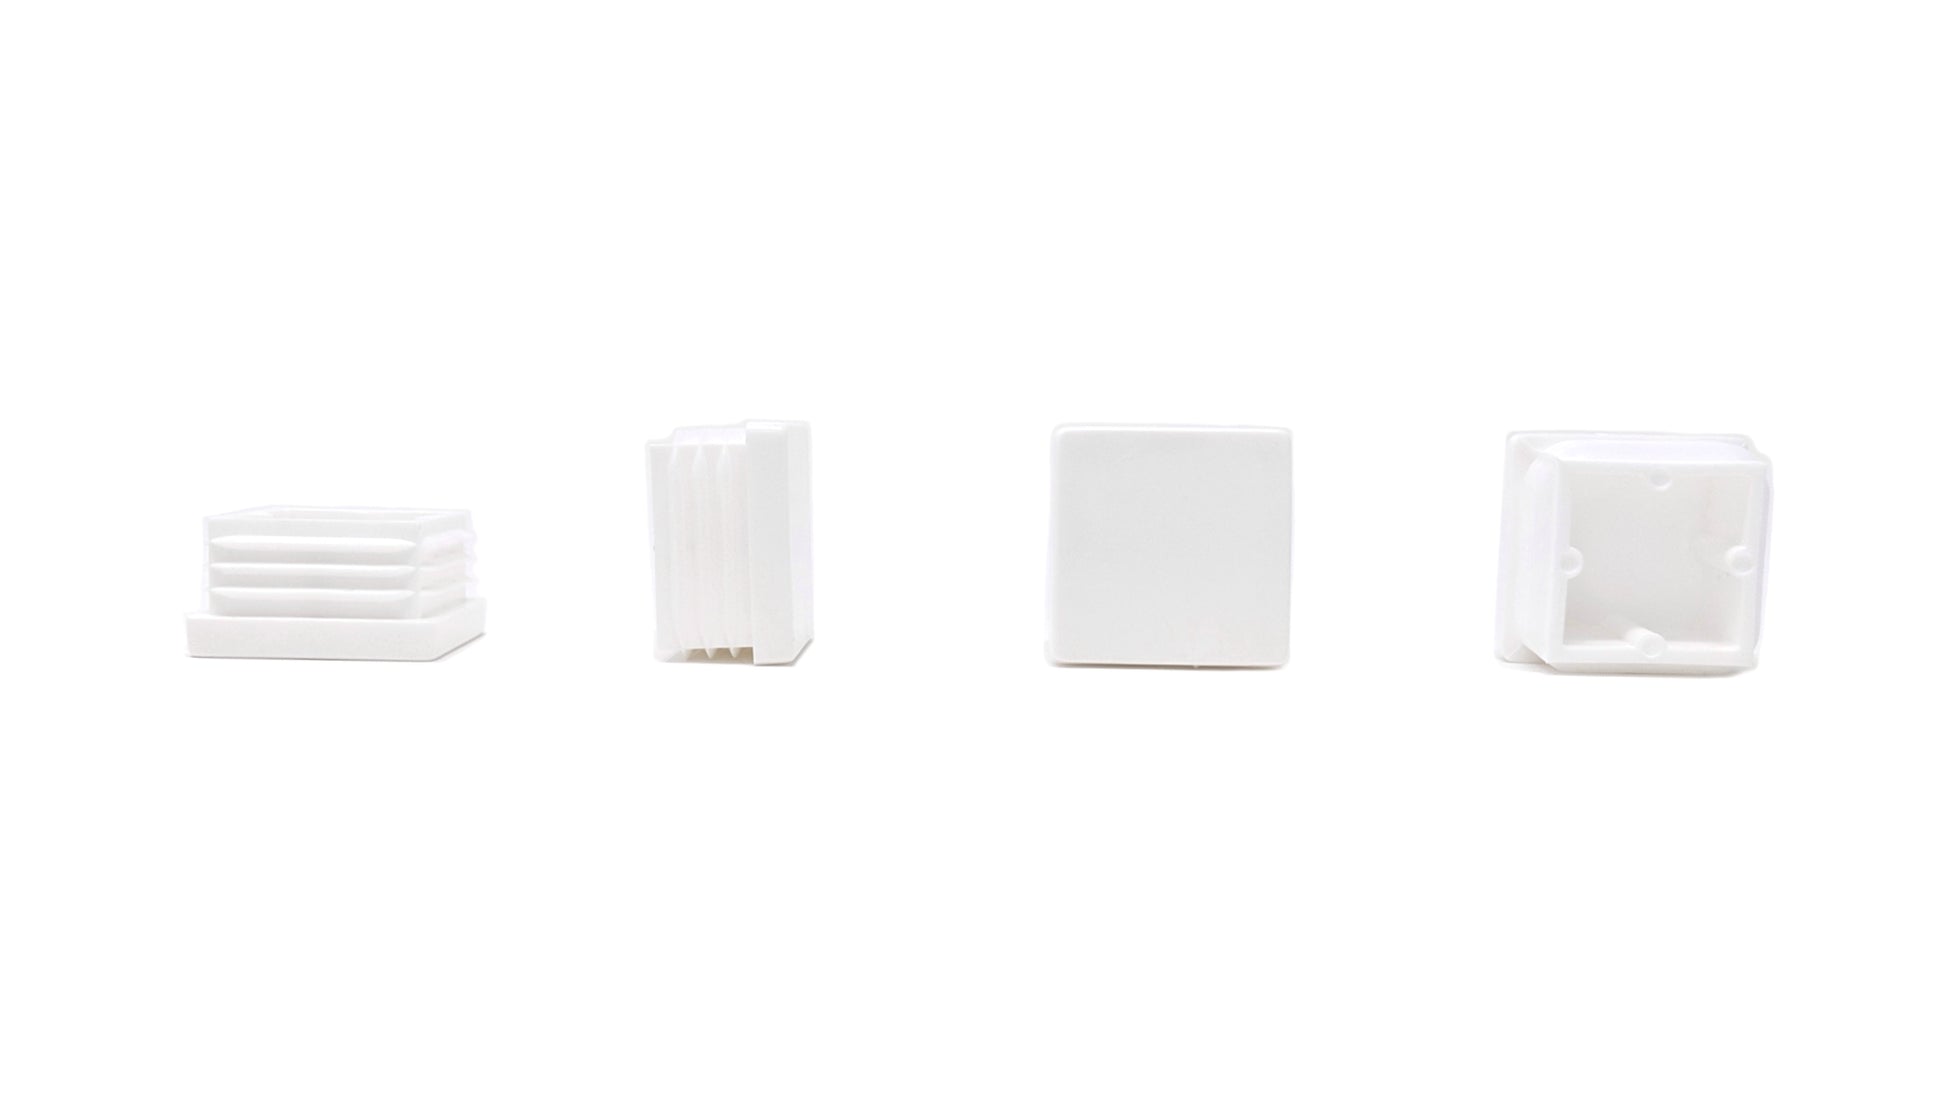 Square Tube Inserts 30mm x 30mm White | Made in Germany | Keay Vital Parts - Keay Vital Parts